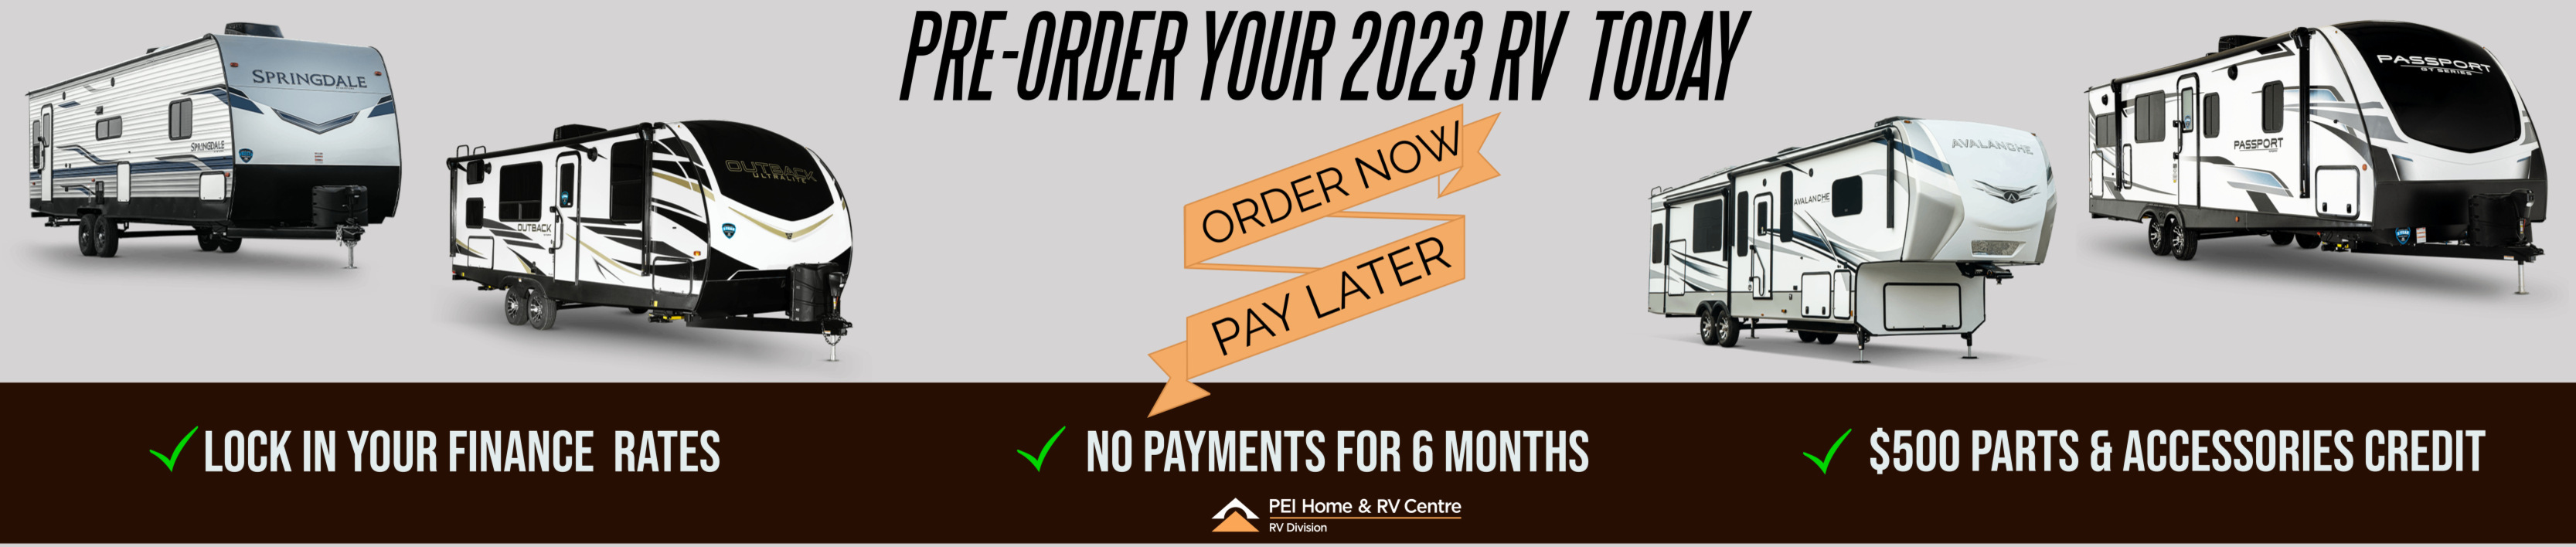 Pre-Order Your RV Banner